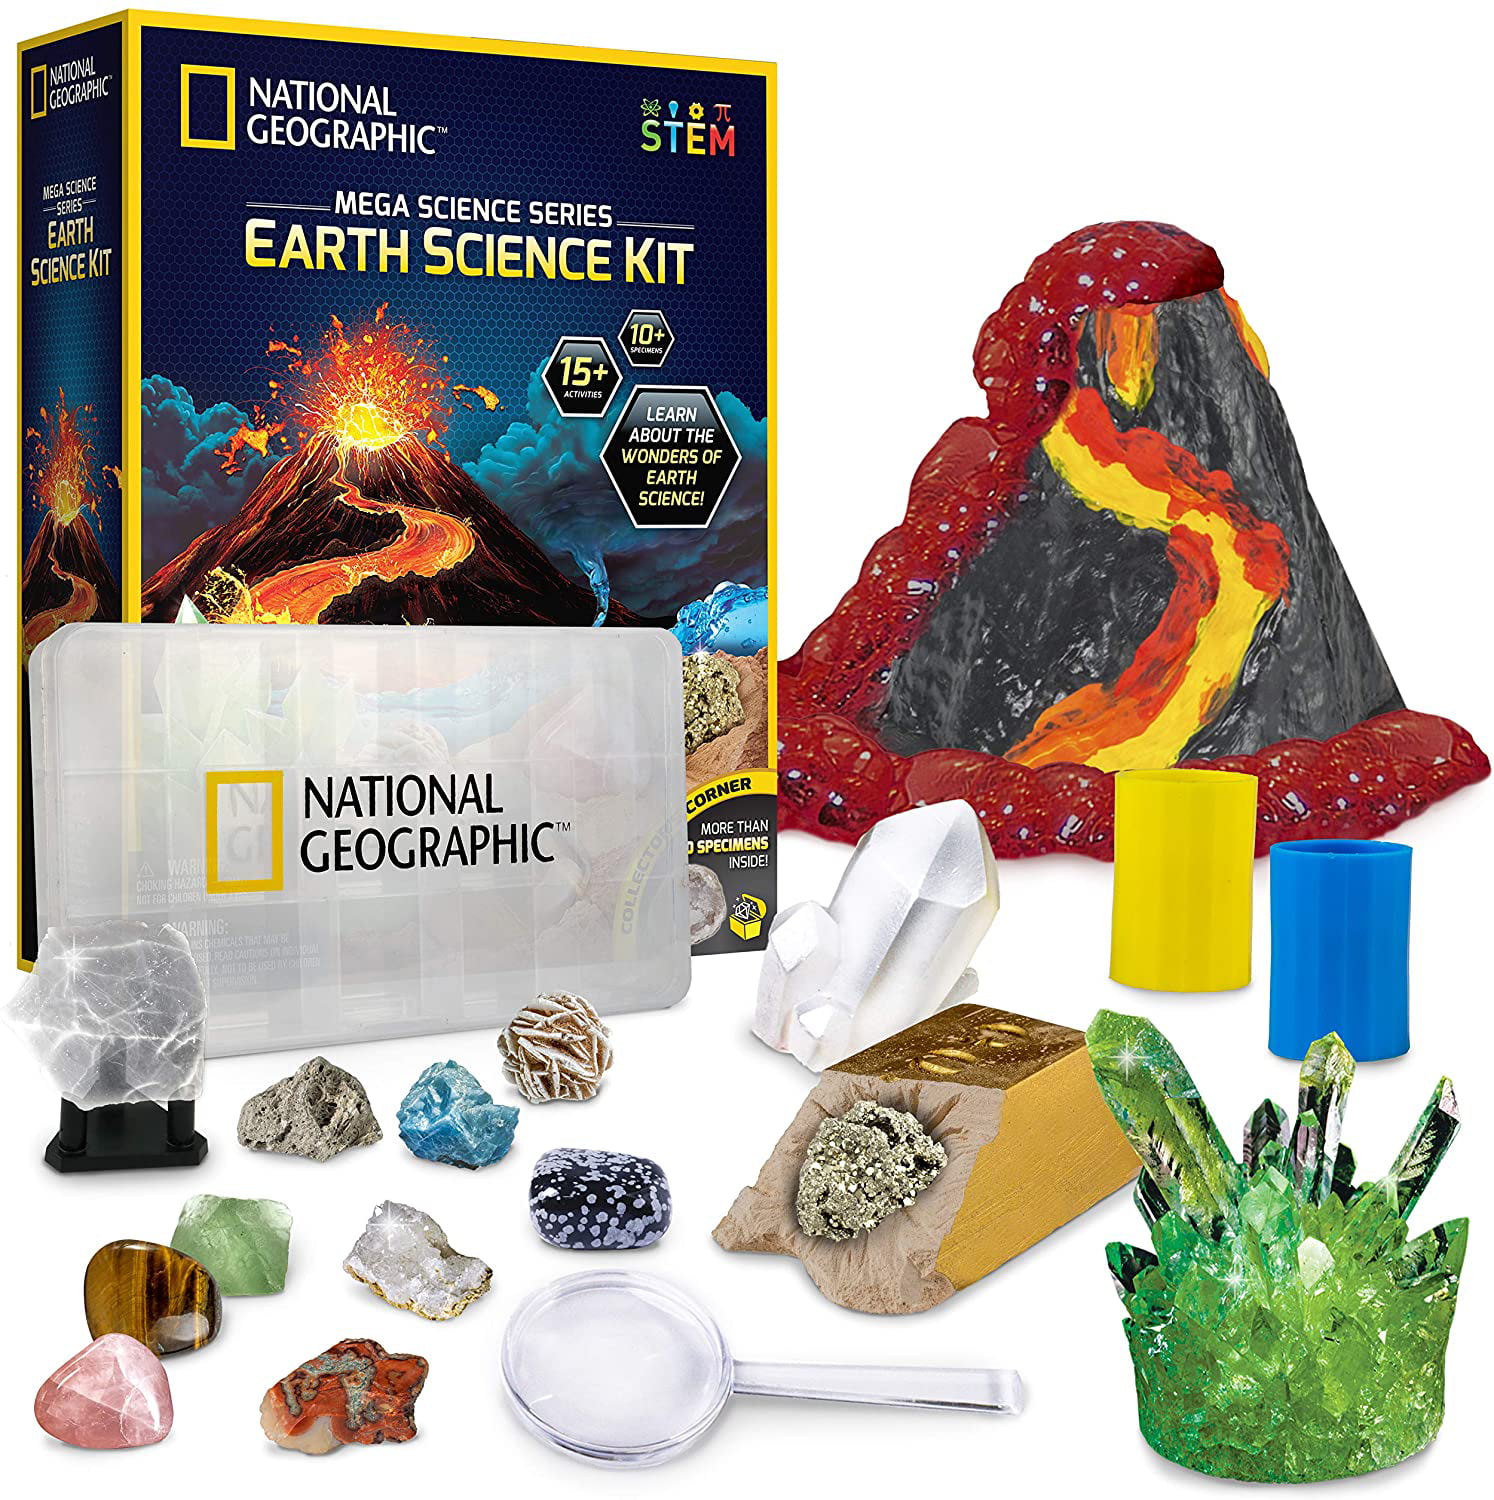 Children's Make Your Own Crystals Volcano Tornado Snow Science Experiment Kit 